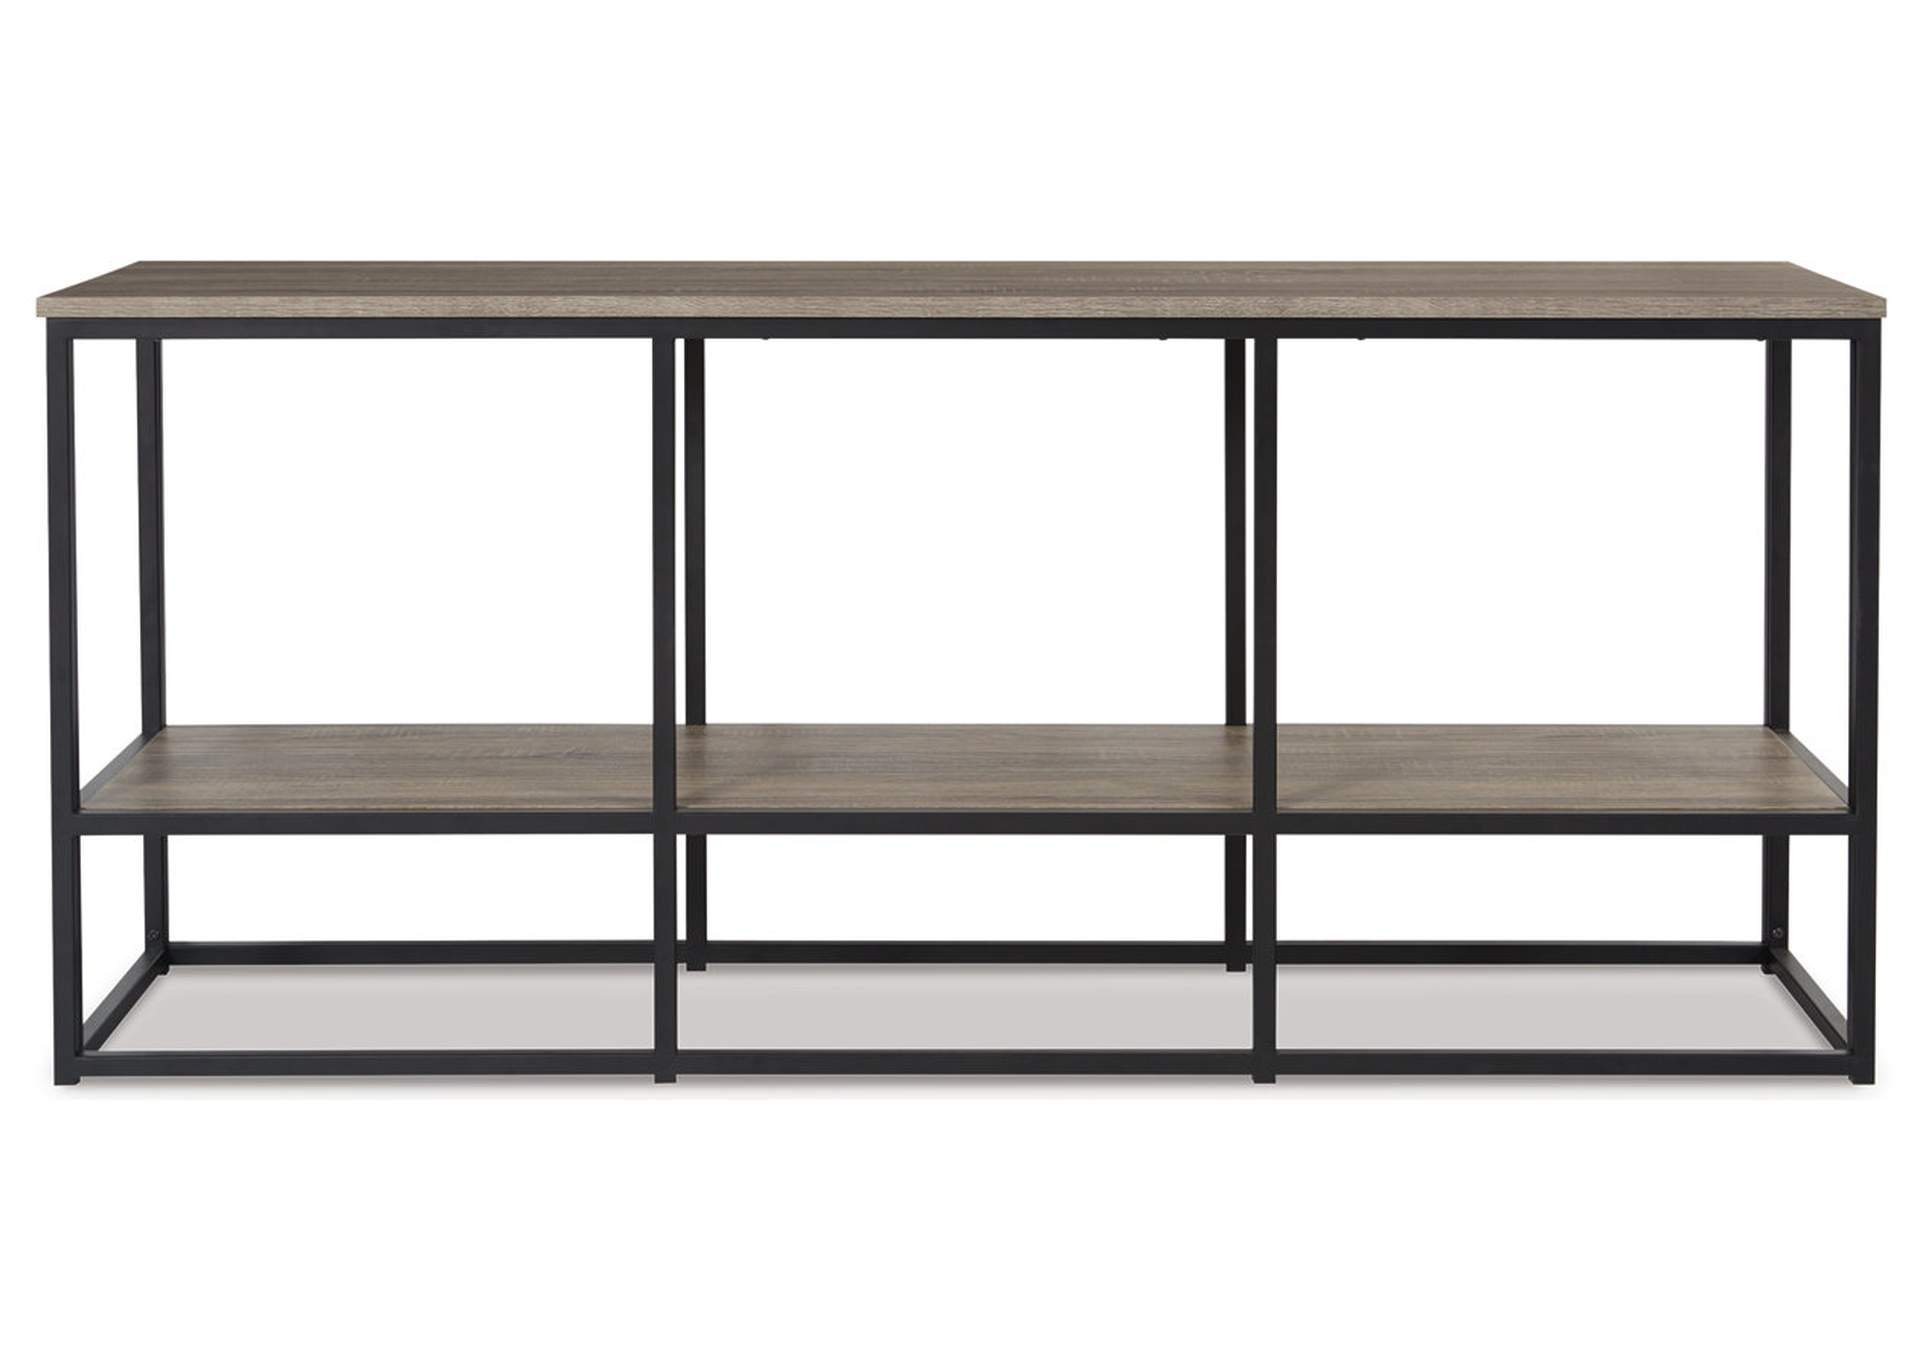 Wadeworth 65" TV Stand,Direct To Consumer Express